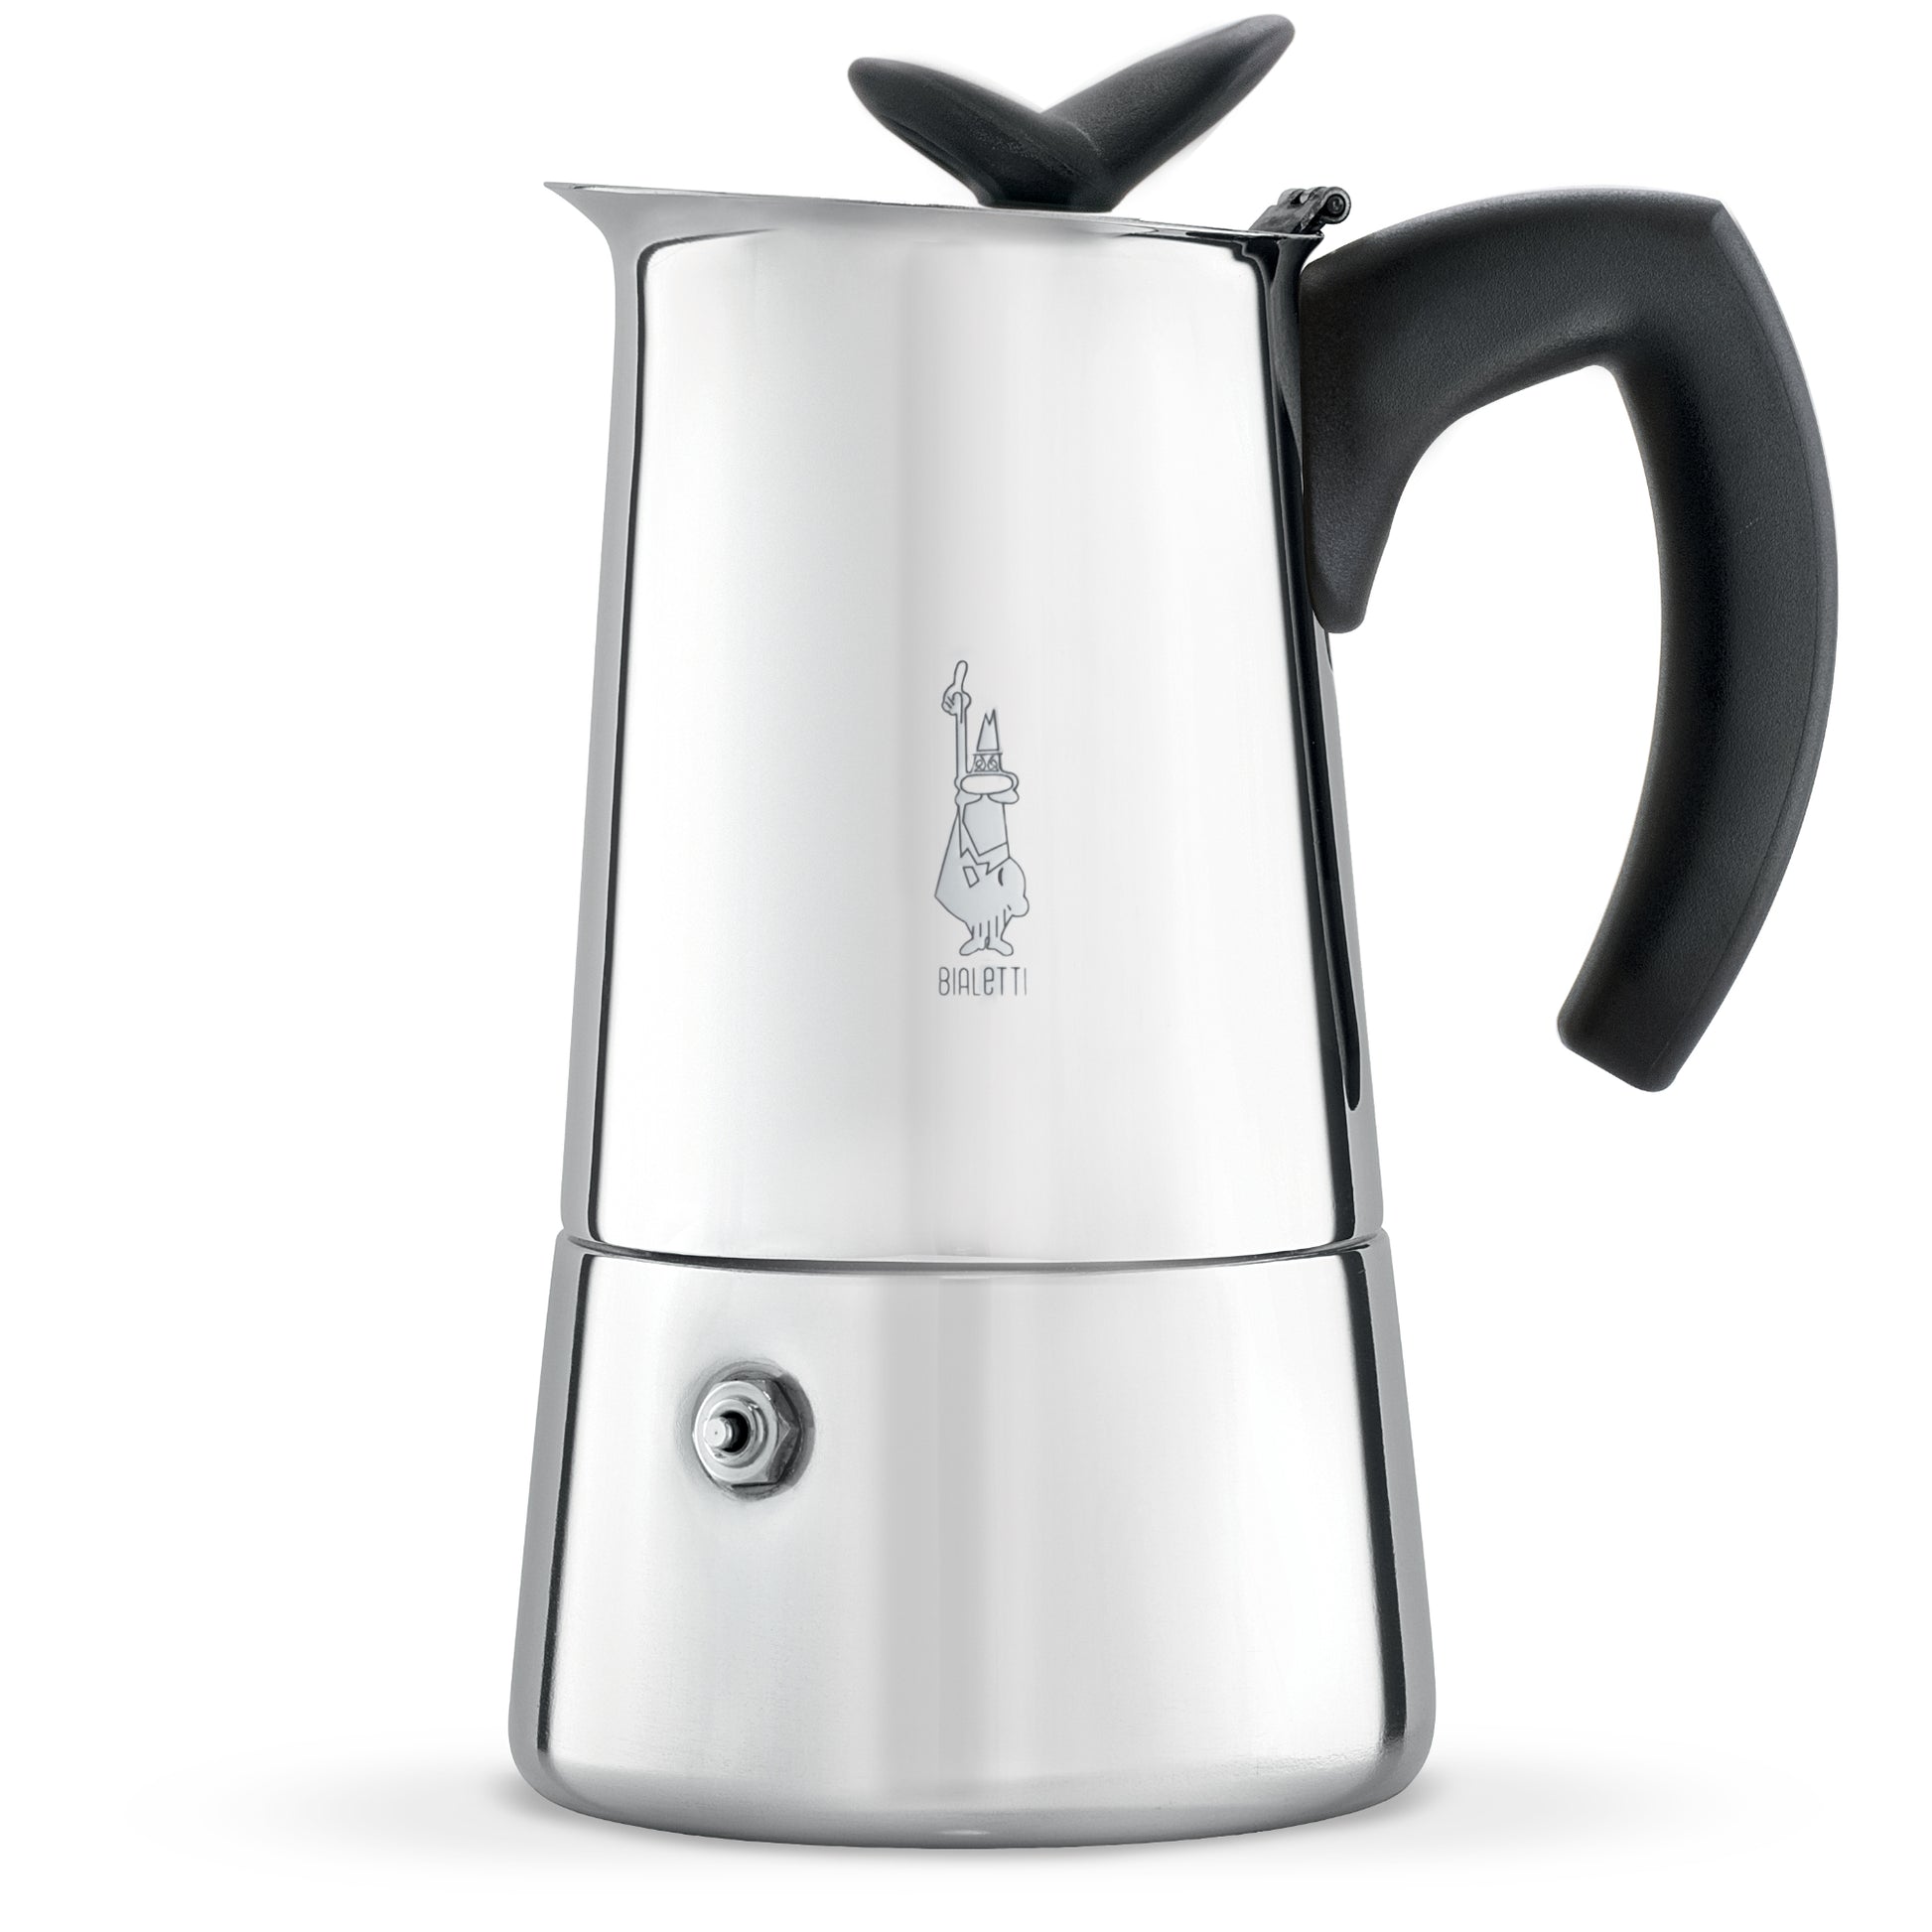 BIALETTI - Manual stainless steel milk frother